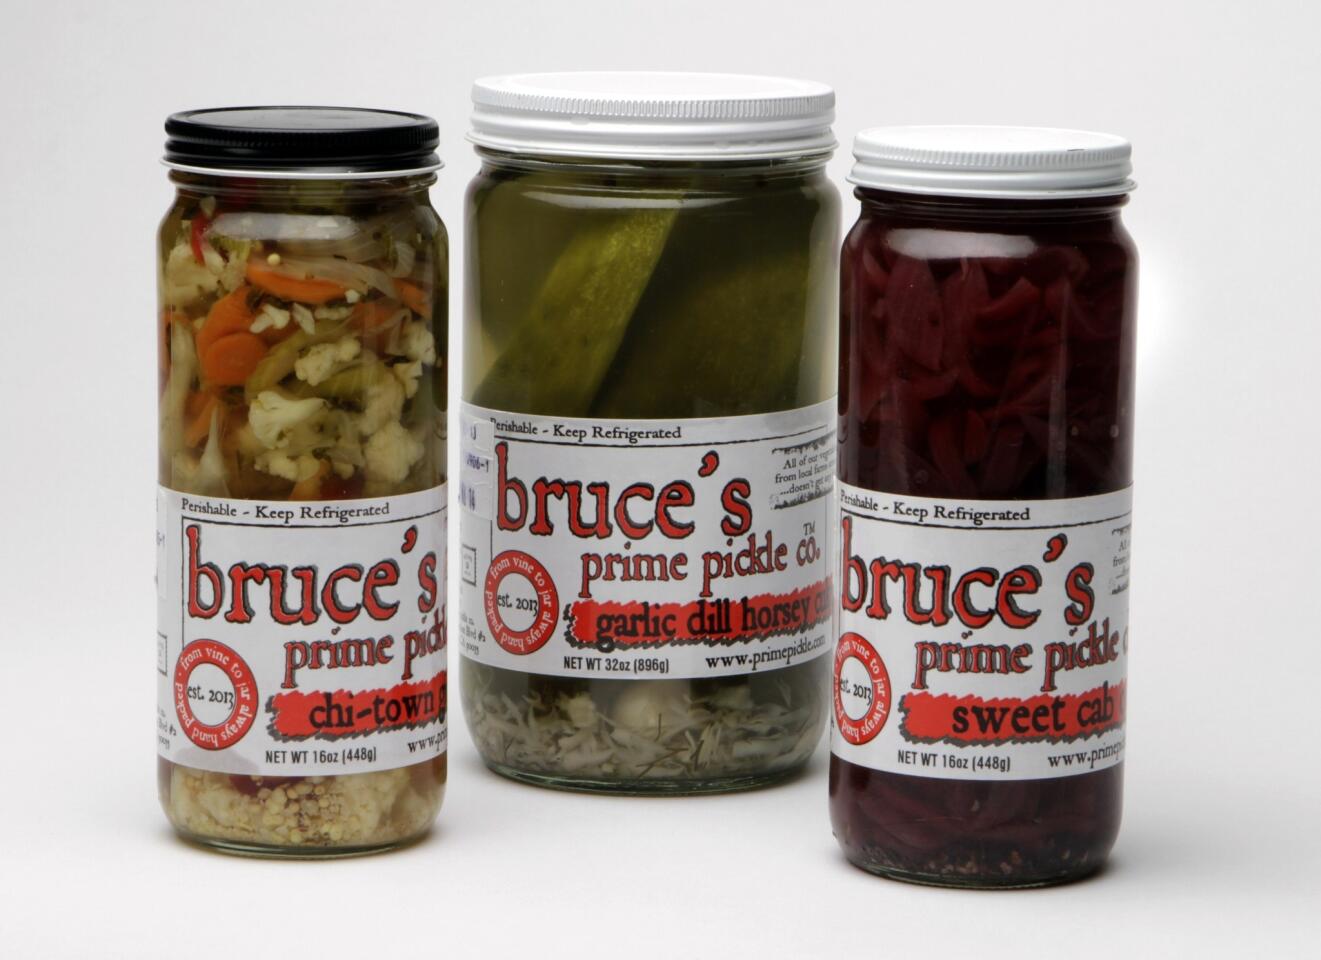 Assorted pickles from Bruce's Prime Pickle Co.